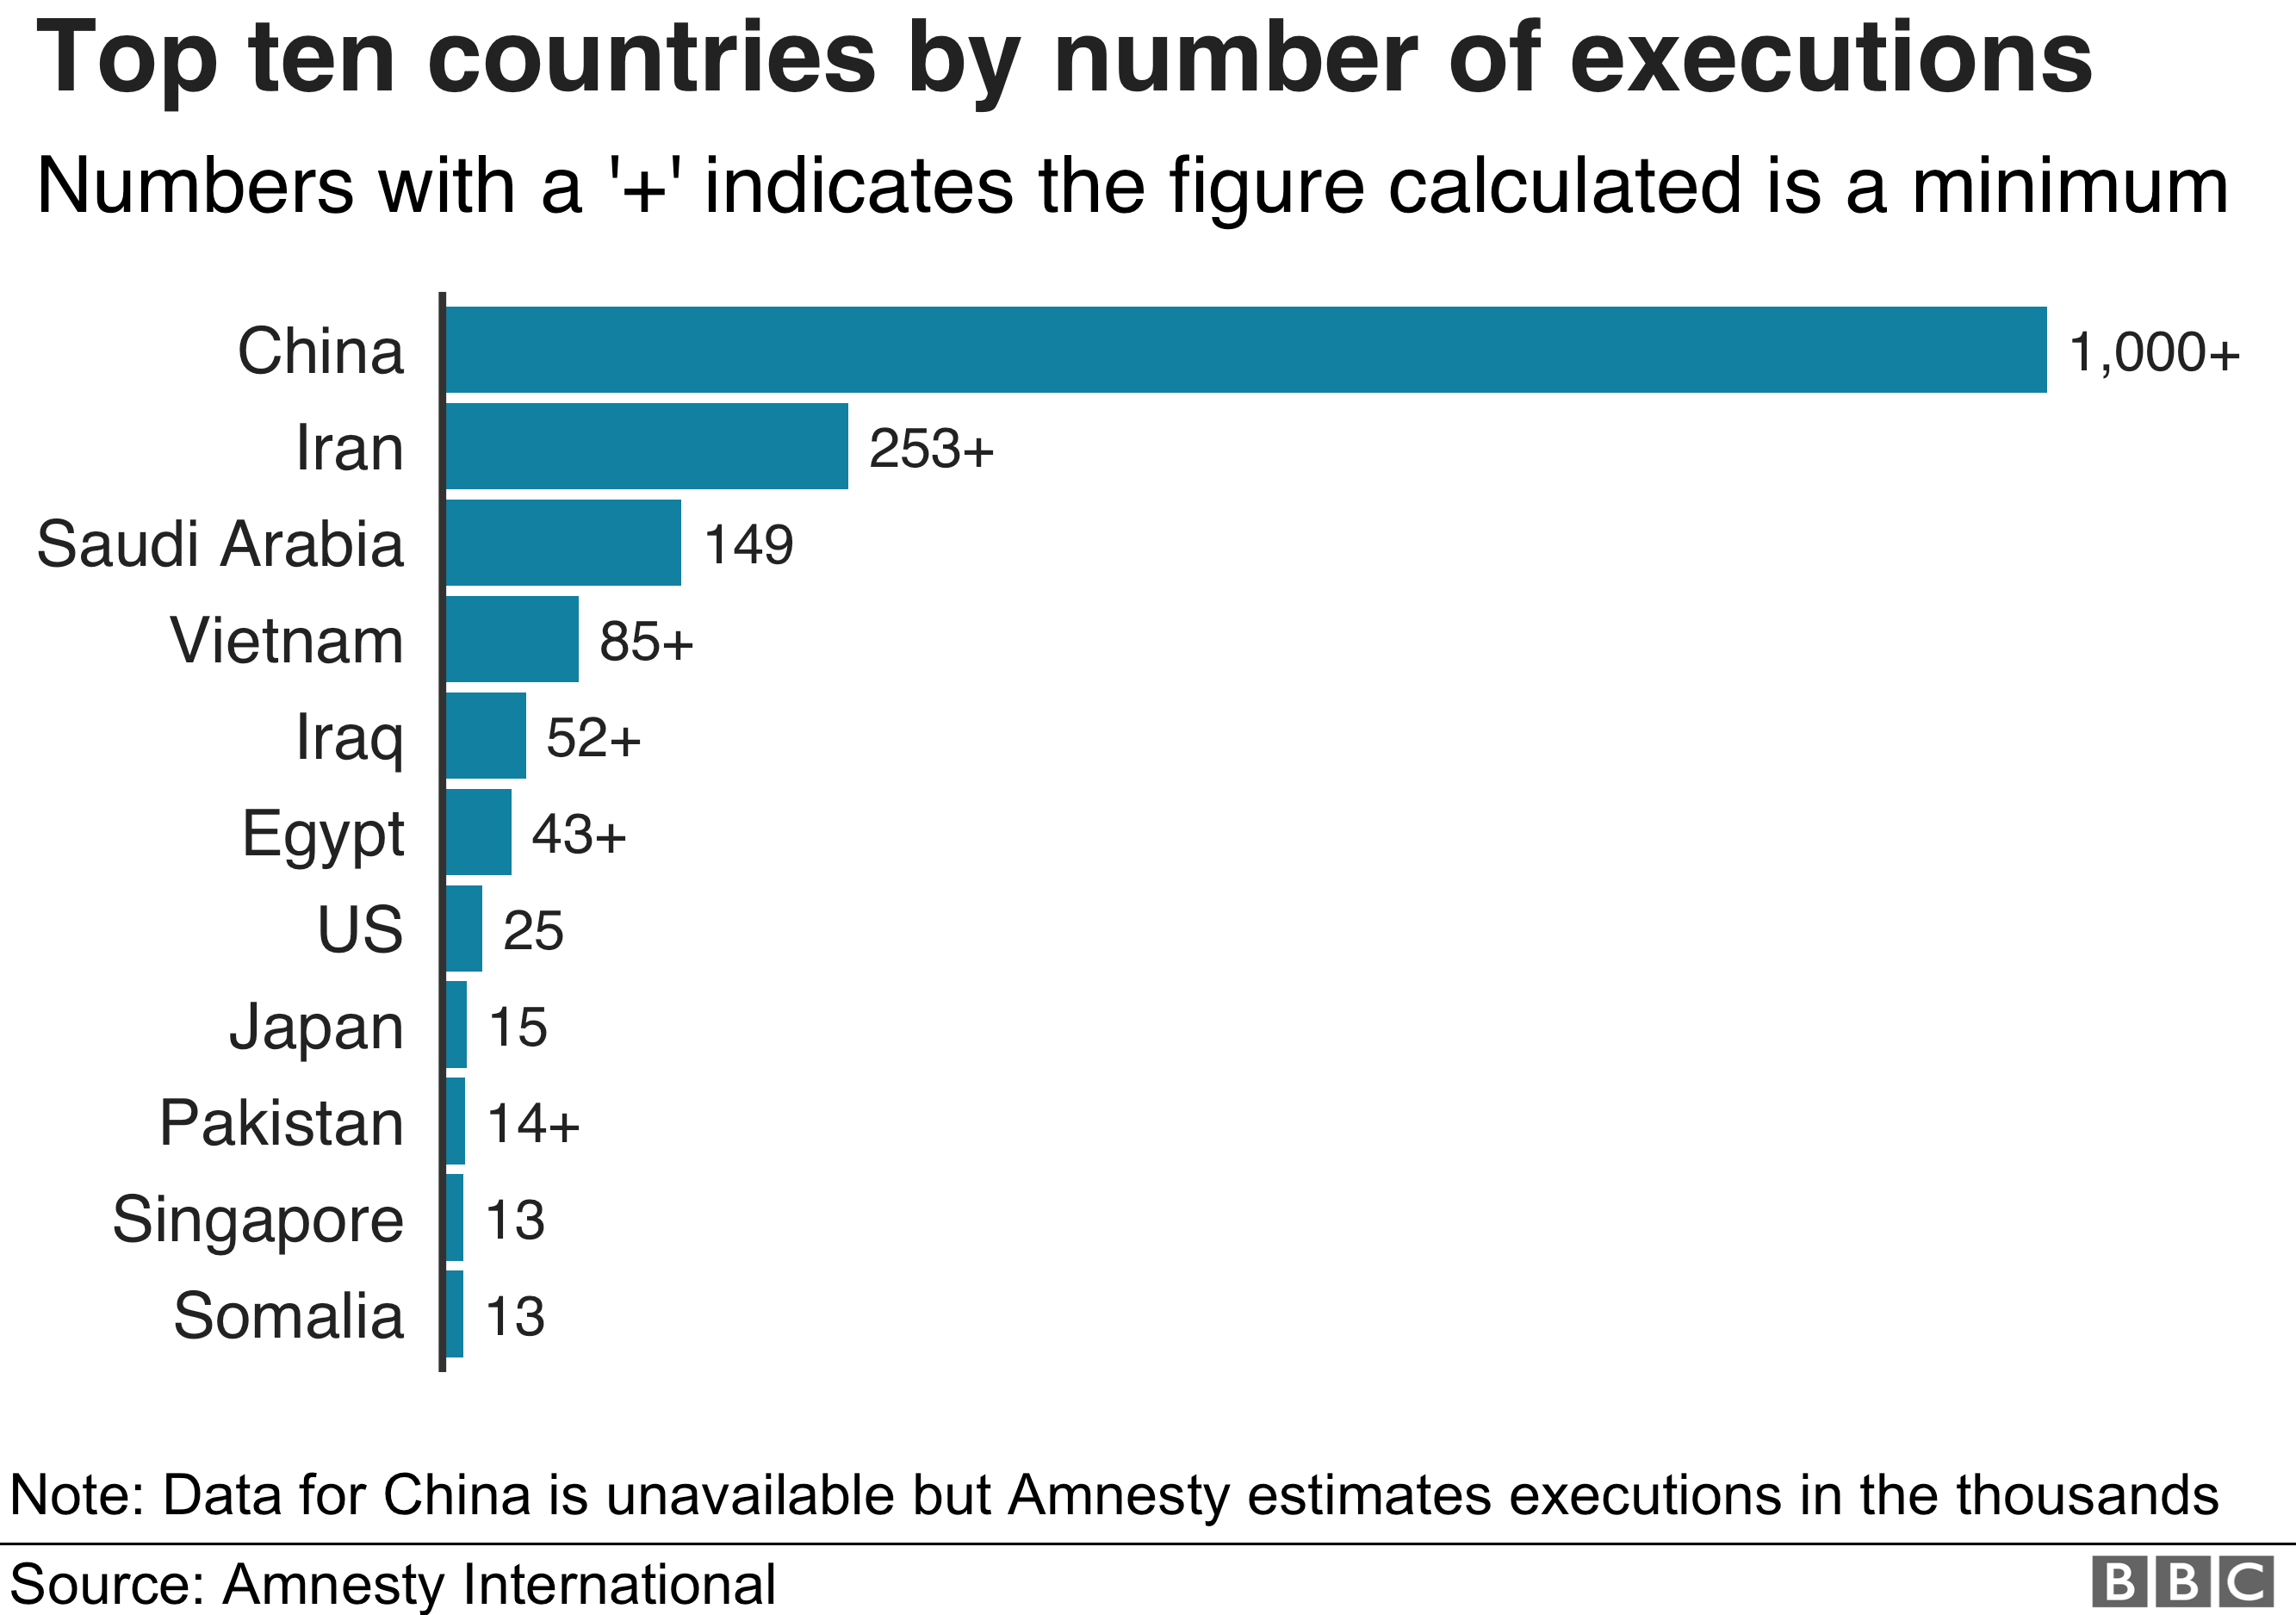 Top ten countries for executions